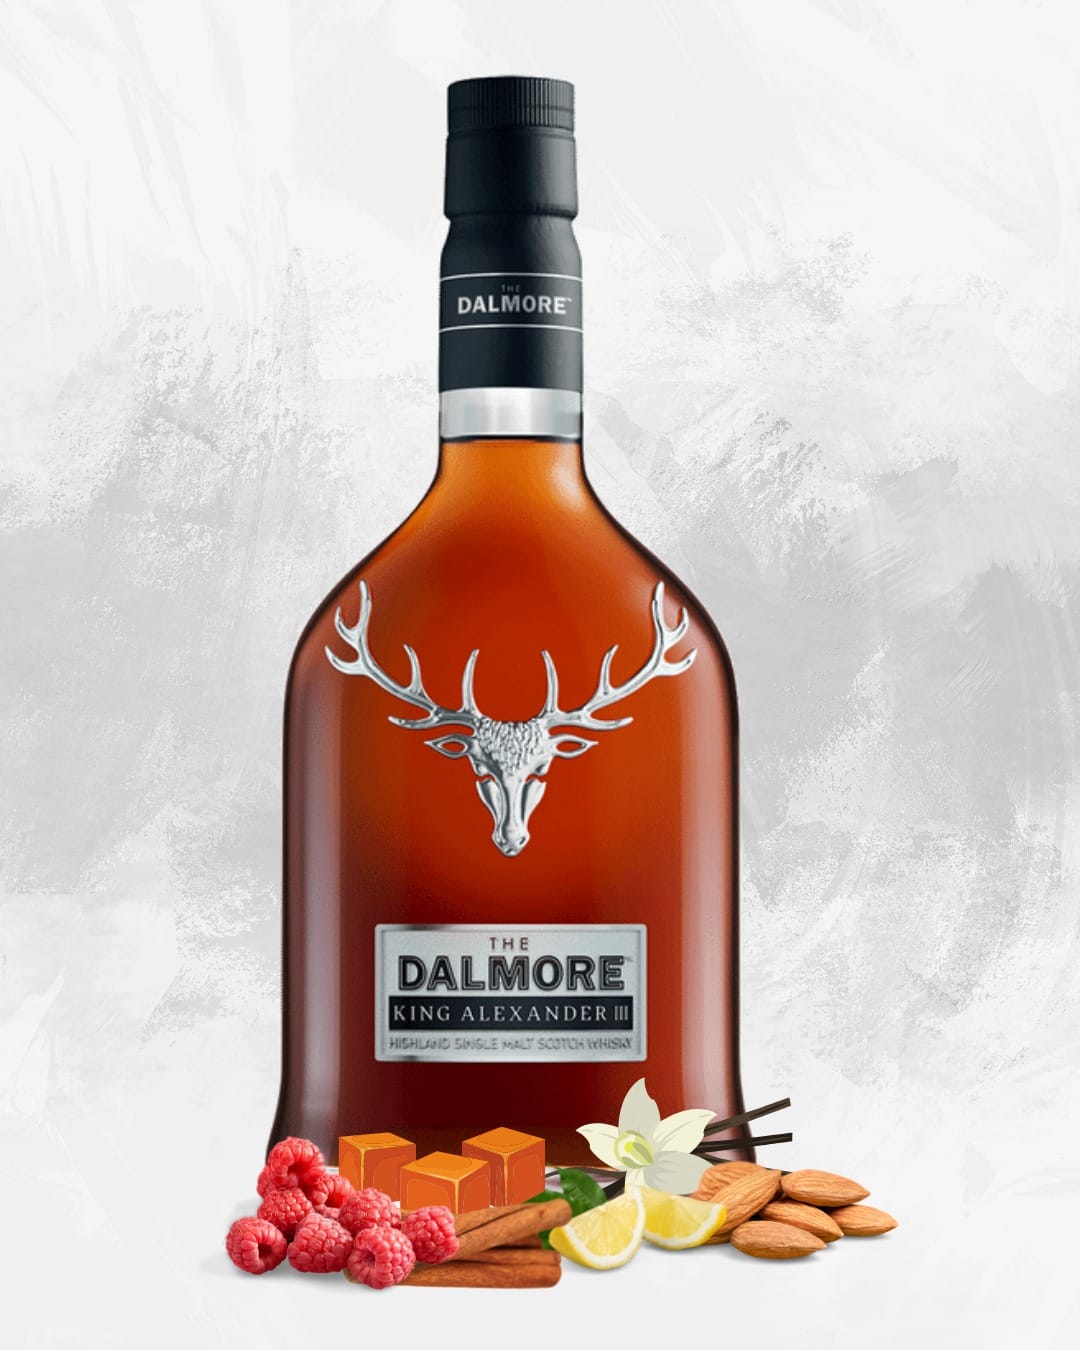 The Dalmore King Alexander III – Setting the Best Standard in Whisky Craftmanship